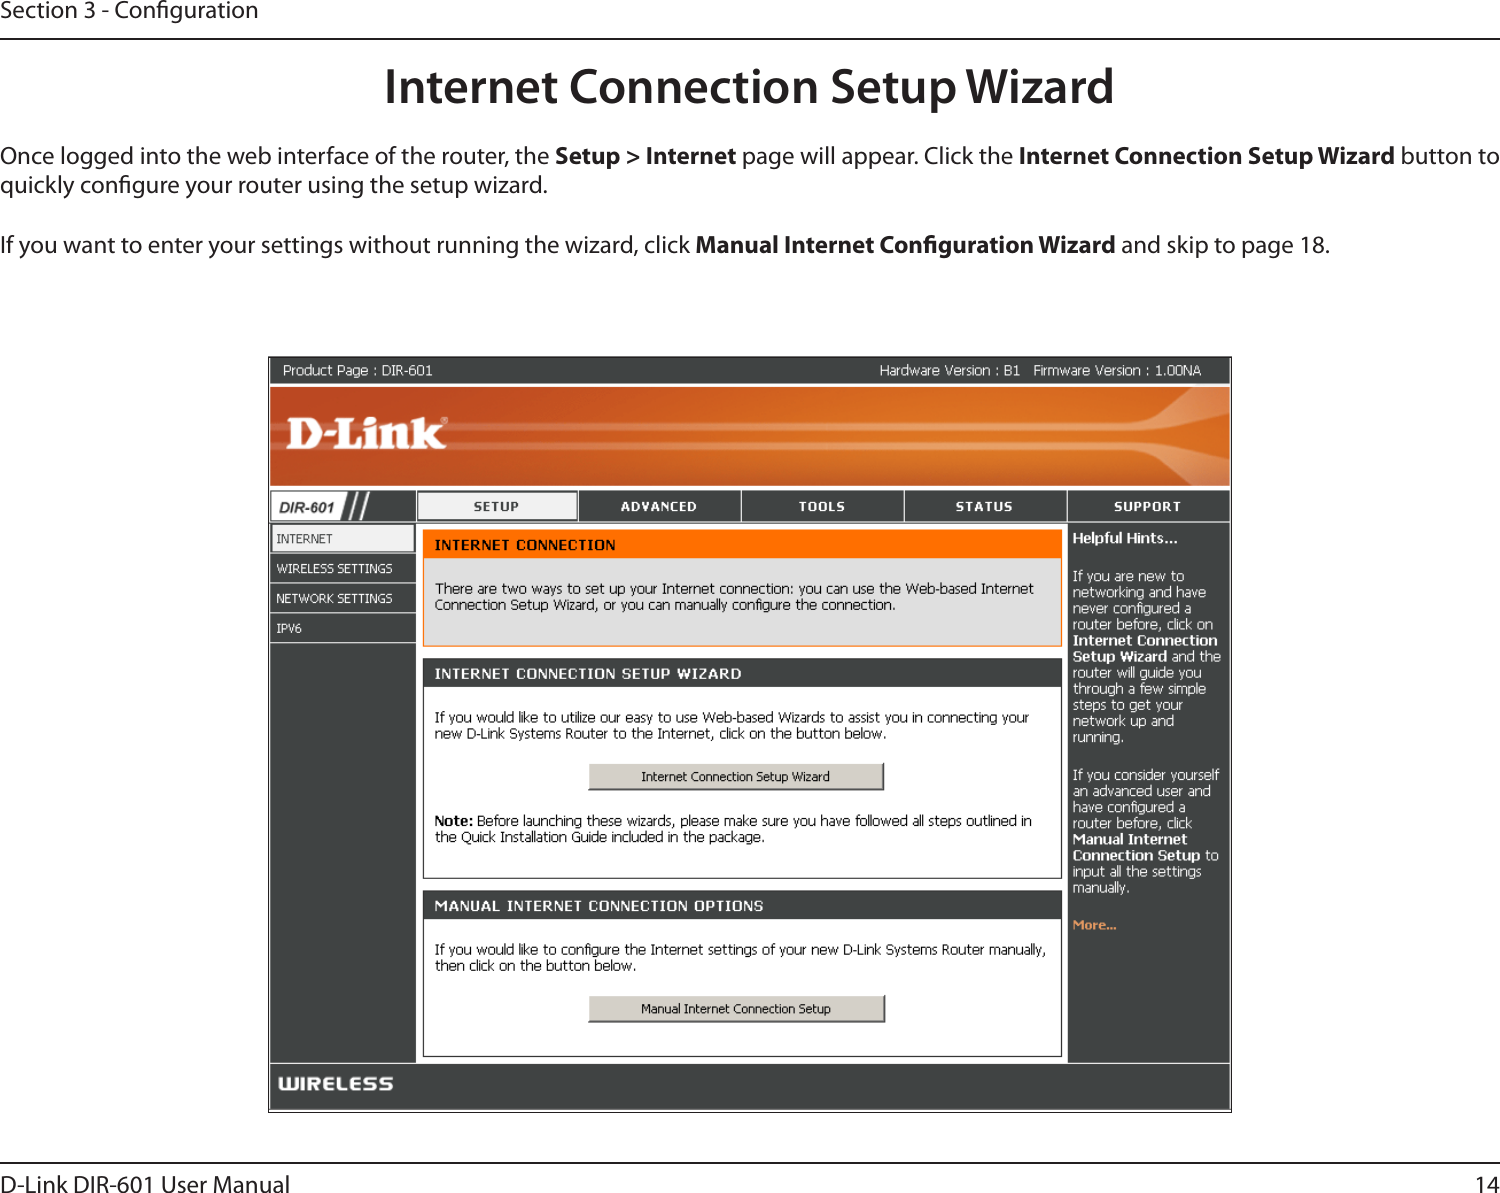 14D-Link DIR-601 User ManualSection 3 - CongurationInternet Connection Setup WizardOnce logged into the web interface of the router, the Setup&gt;Internet page will appear. Click the InternetConnectionSetupWizard button to quickly congure your router using the setup wizard.If you want to enter your settings without running the wizard, click Manual Internet Conguration Wizard and skip to page 18.